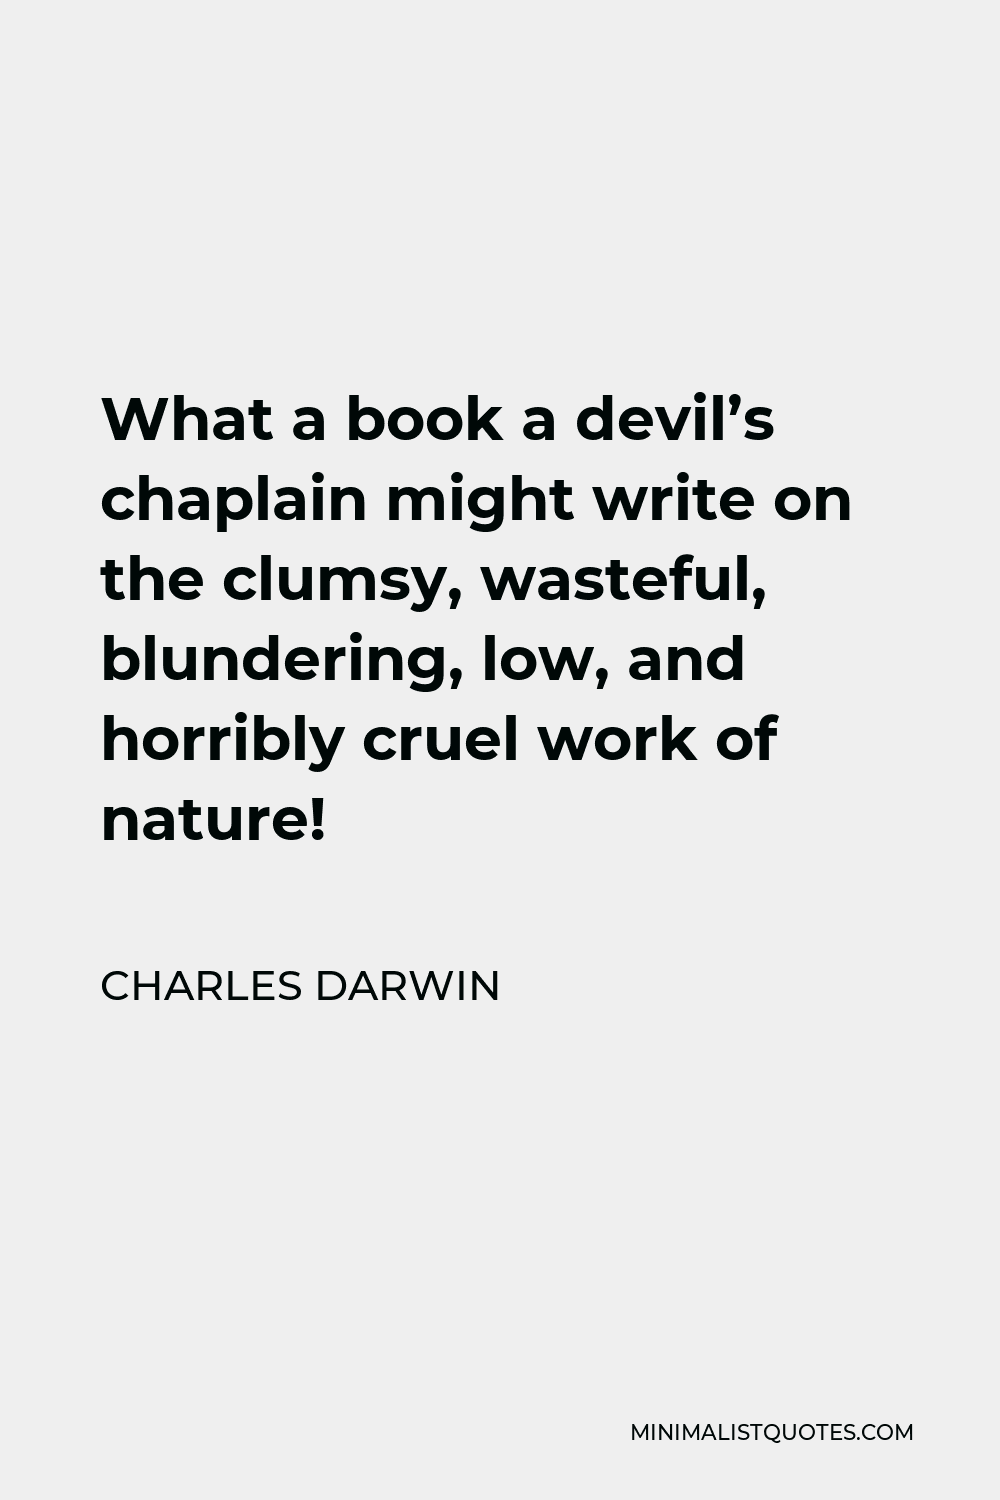 Charles Darwin Quote - What a book a devil’s chaplain might write on the clumsy, wasteful, blundering, low, and horribly cruel work of nature!